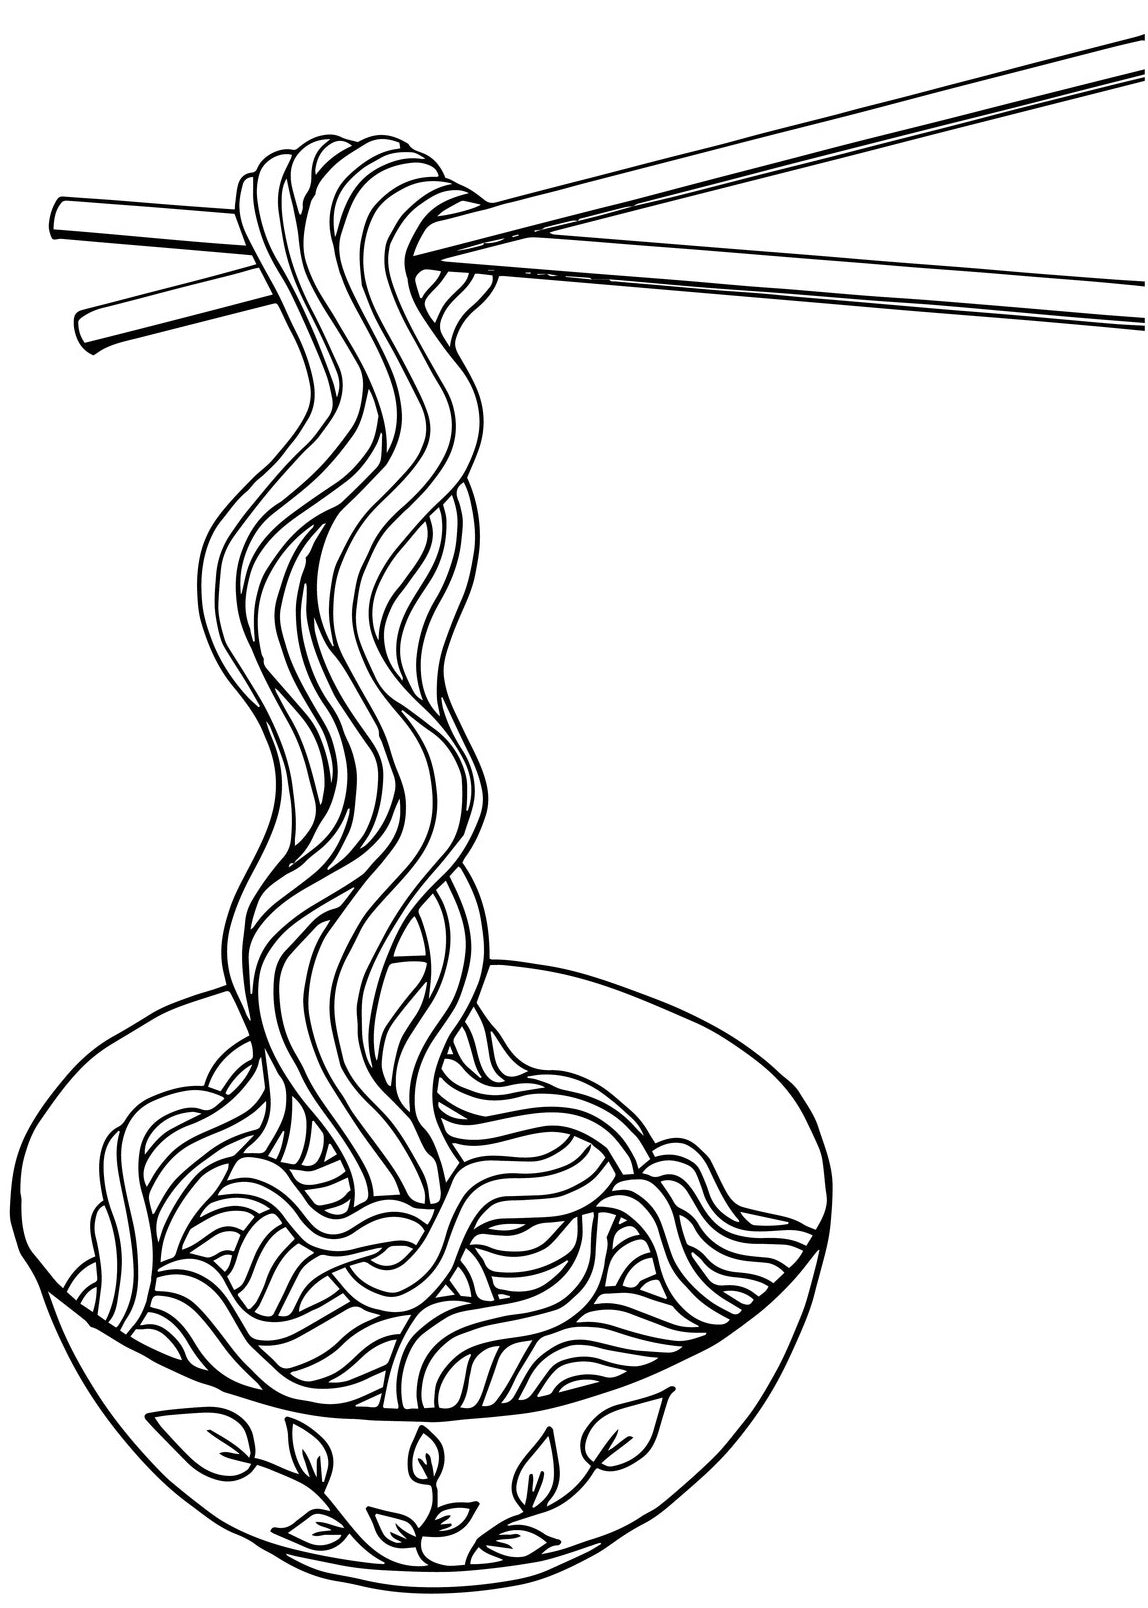 Noodles Doodles - Chinese Food Patterns – Stress Relieving Spaghetti Coloring (PDF Book)